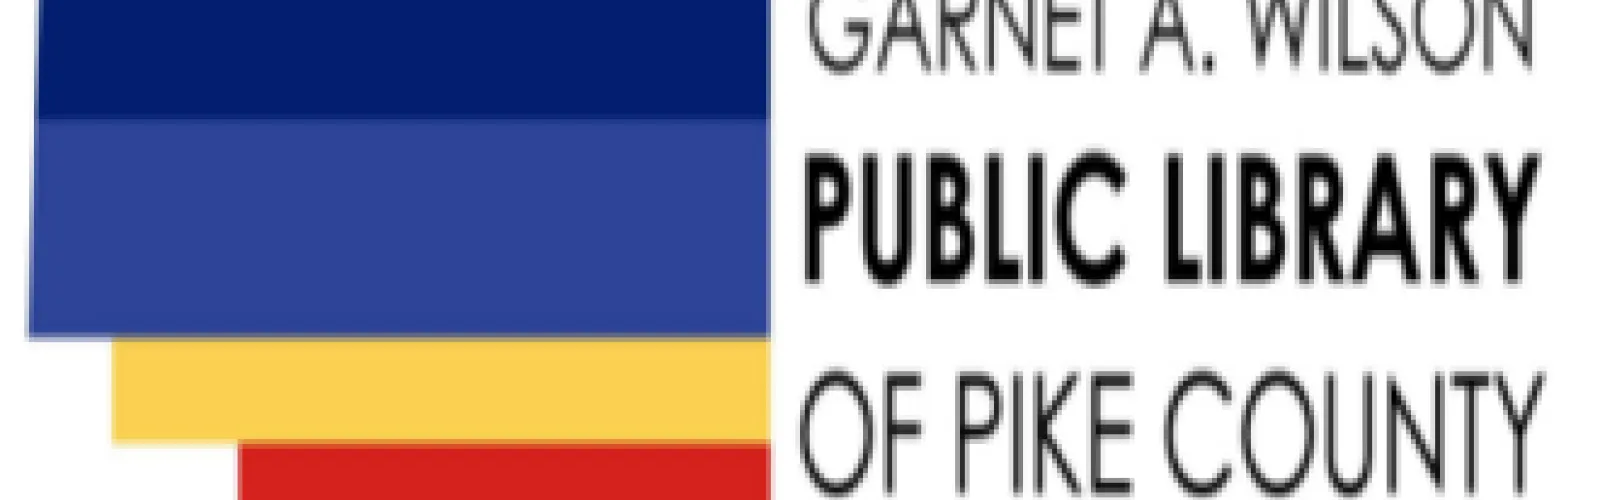 There is a picture. It is the library logo consisting of dark blue light blue yellow and red stripes and the name Garnet a wilson public library of pike county